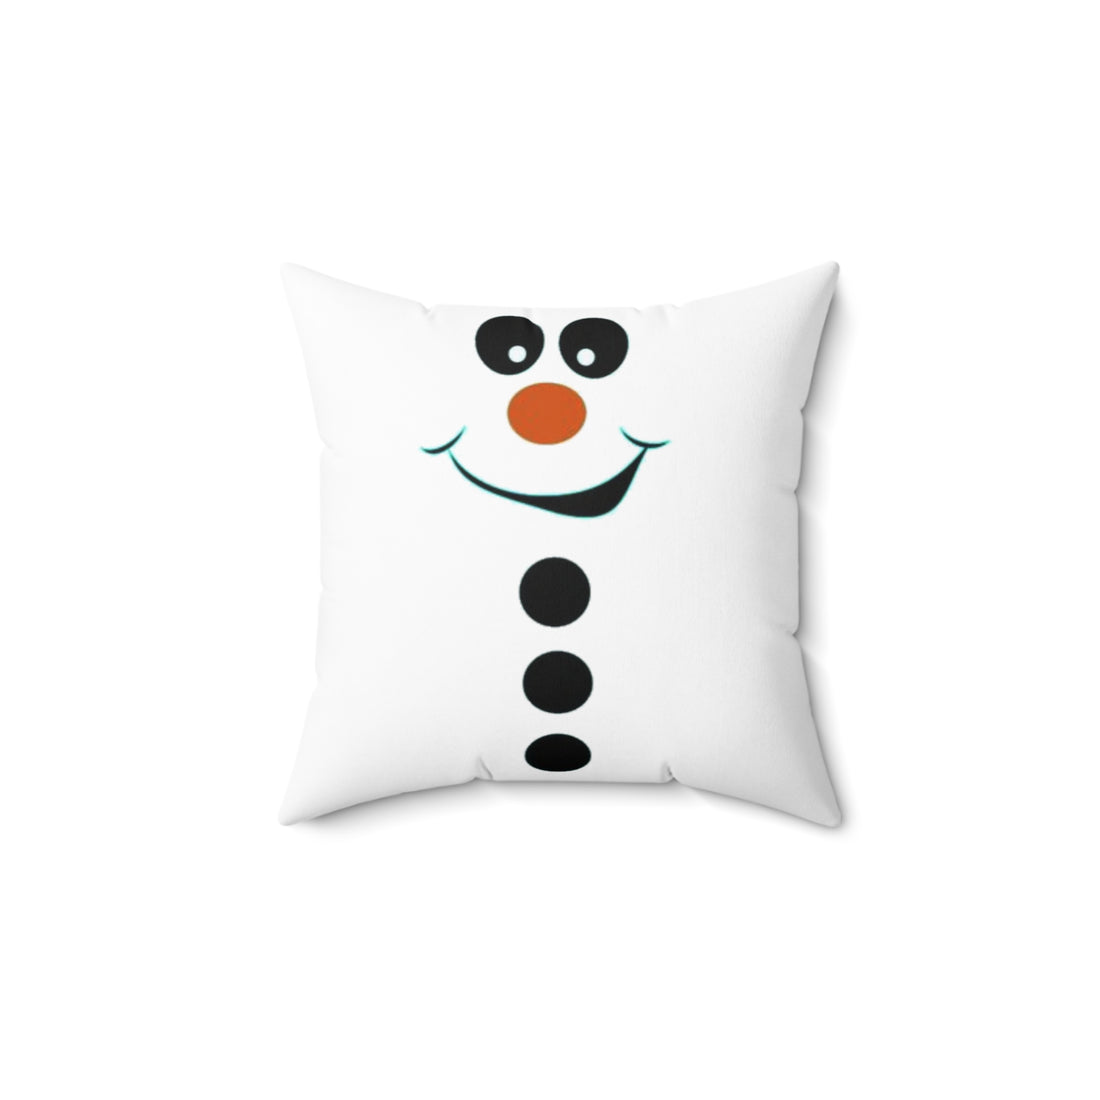 Pillow Snowman Home-clothes-jewelry